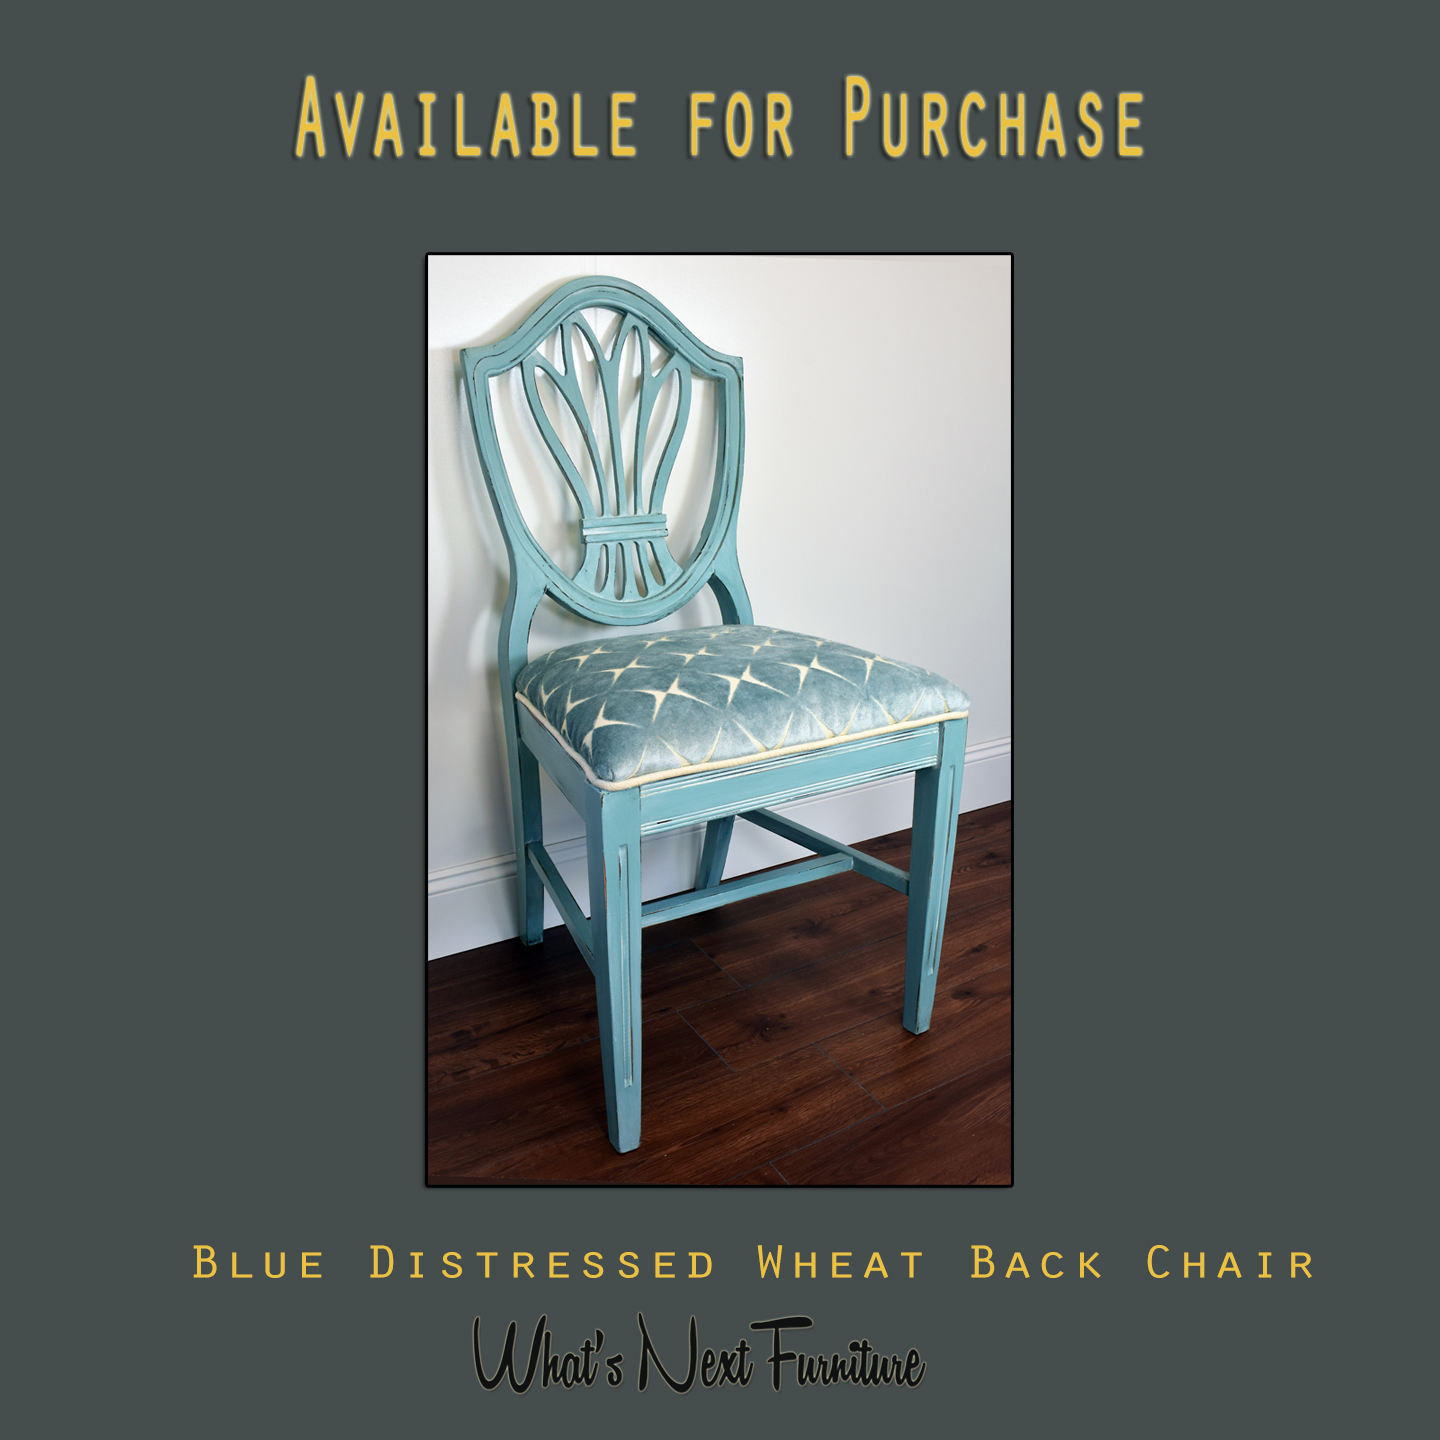 Blue distressed Chair available square grey.jpg